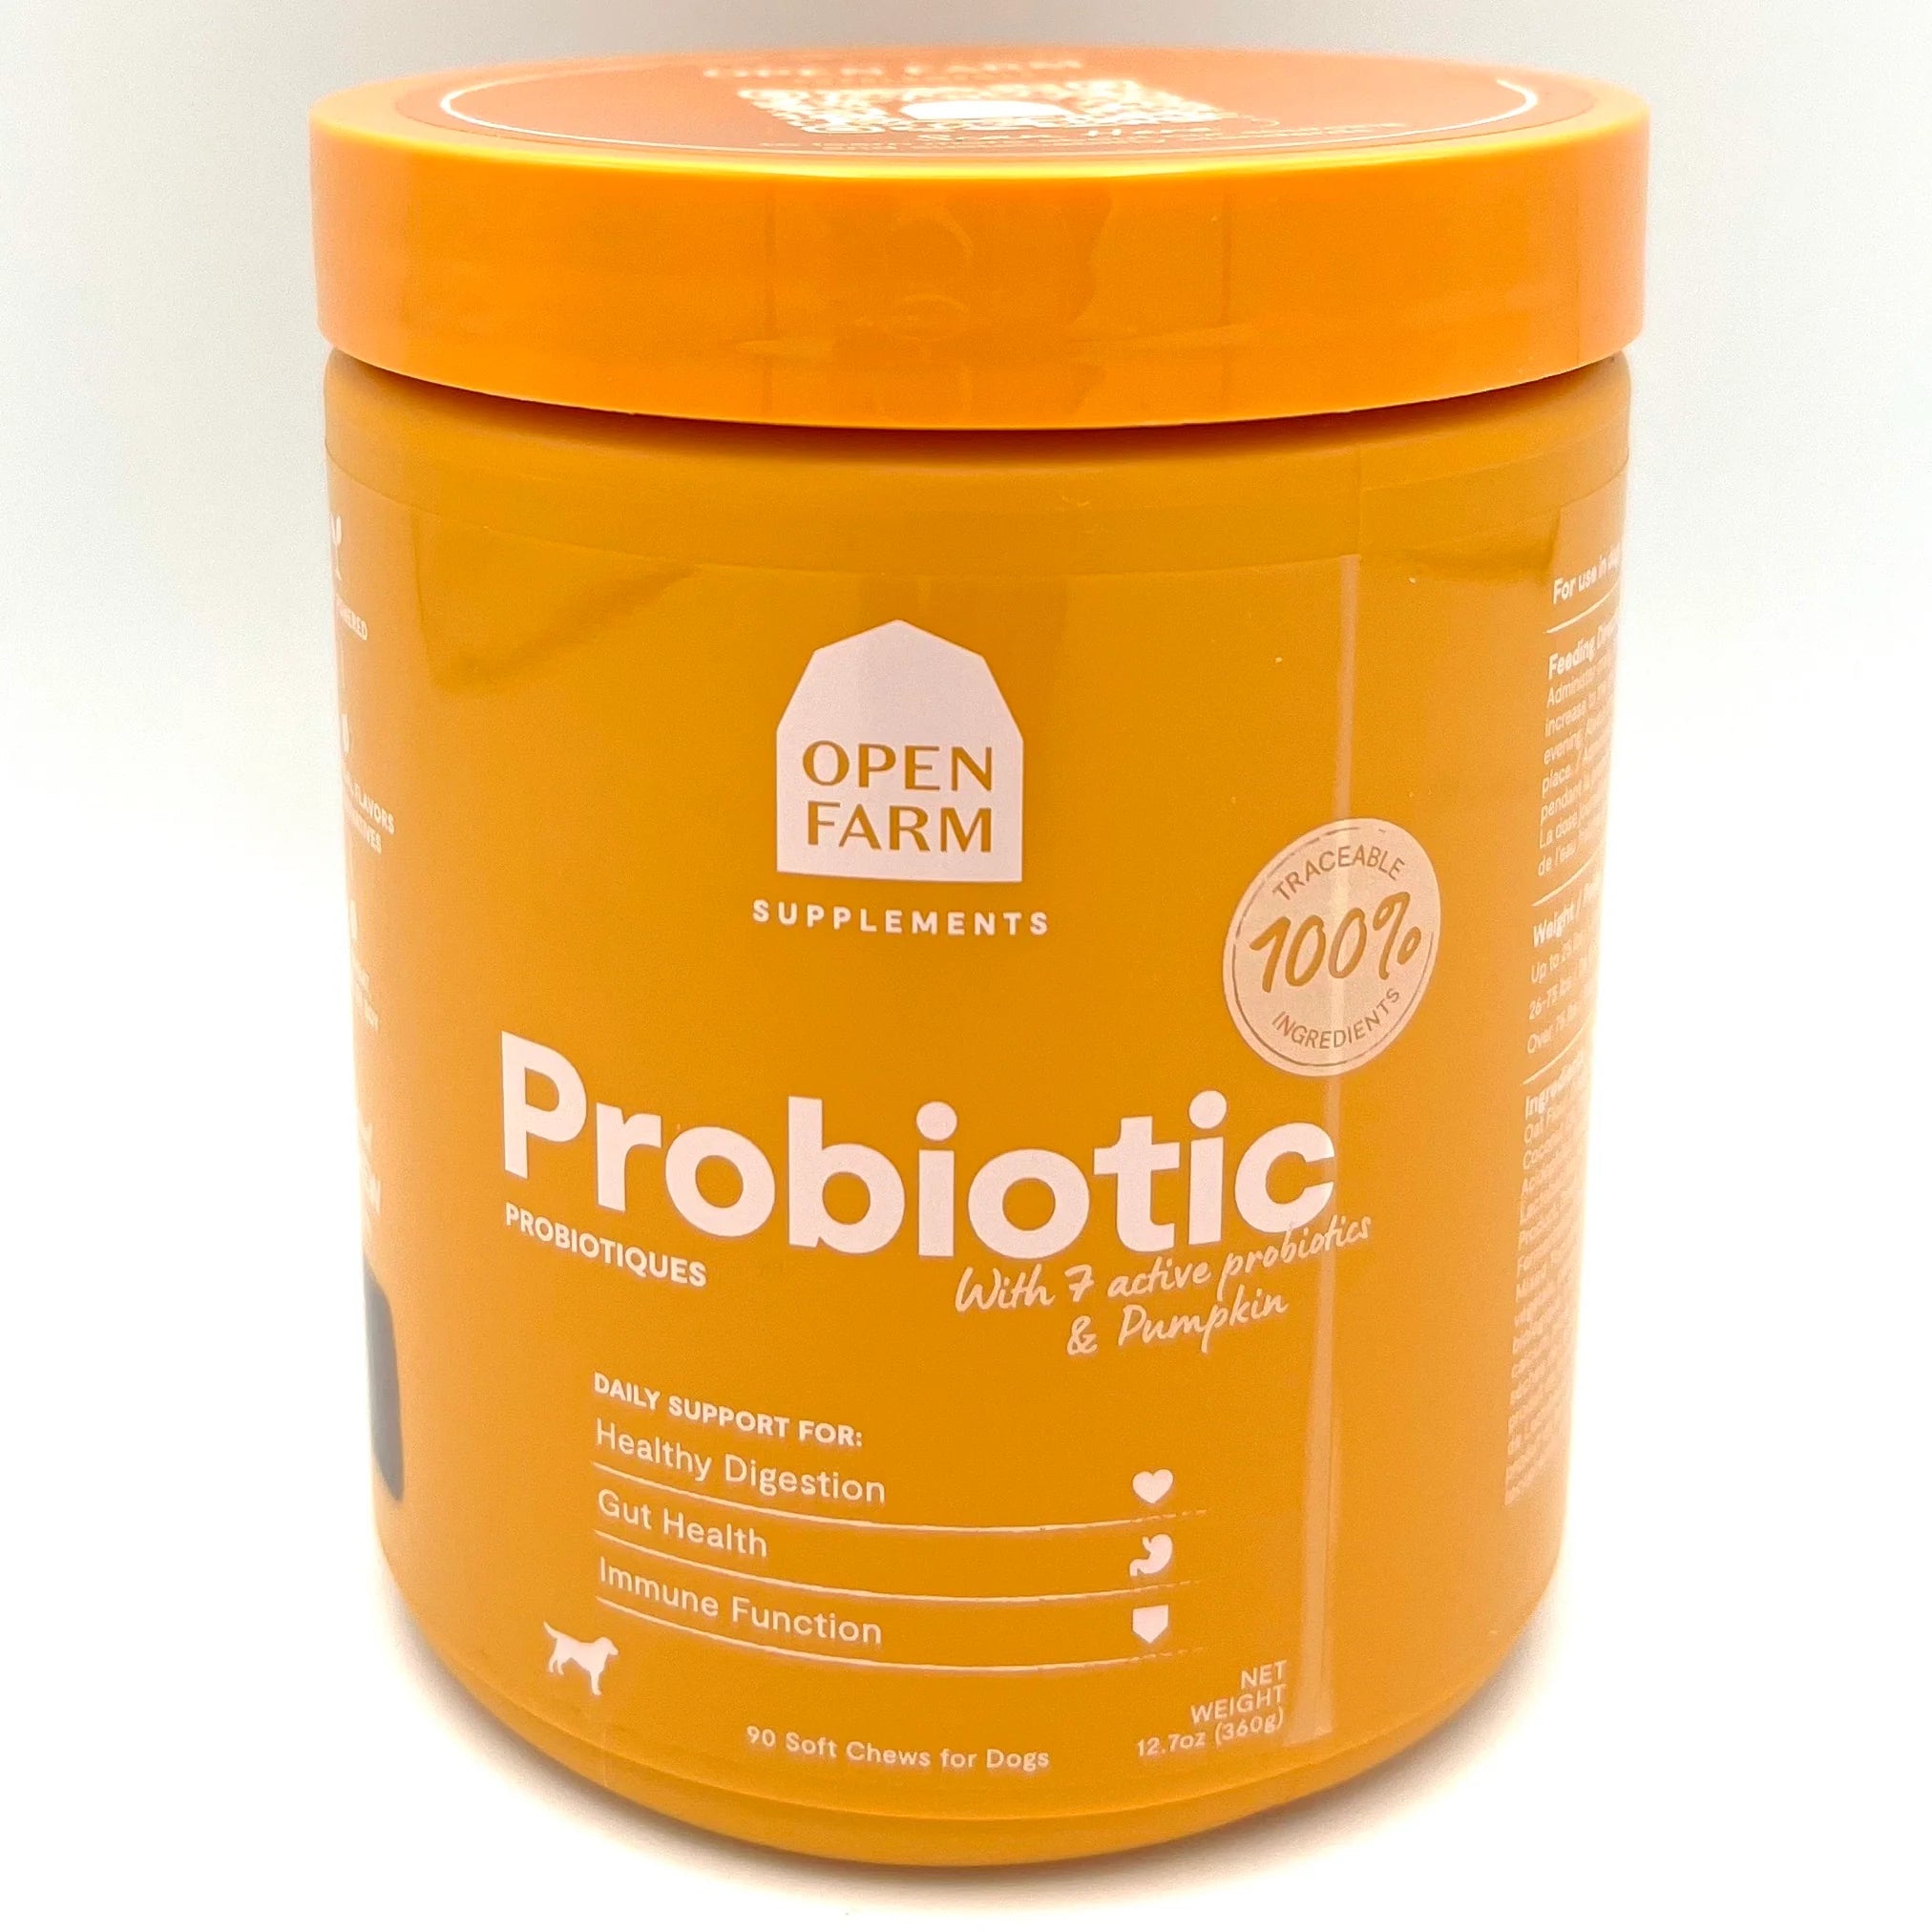 Open Farm Probiotic Supplement Chews for Dogs with Pumpkin for Healthy Digestion, Gut Health & Immune Function